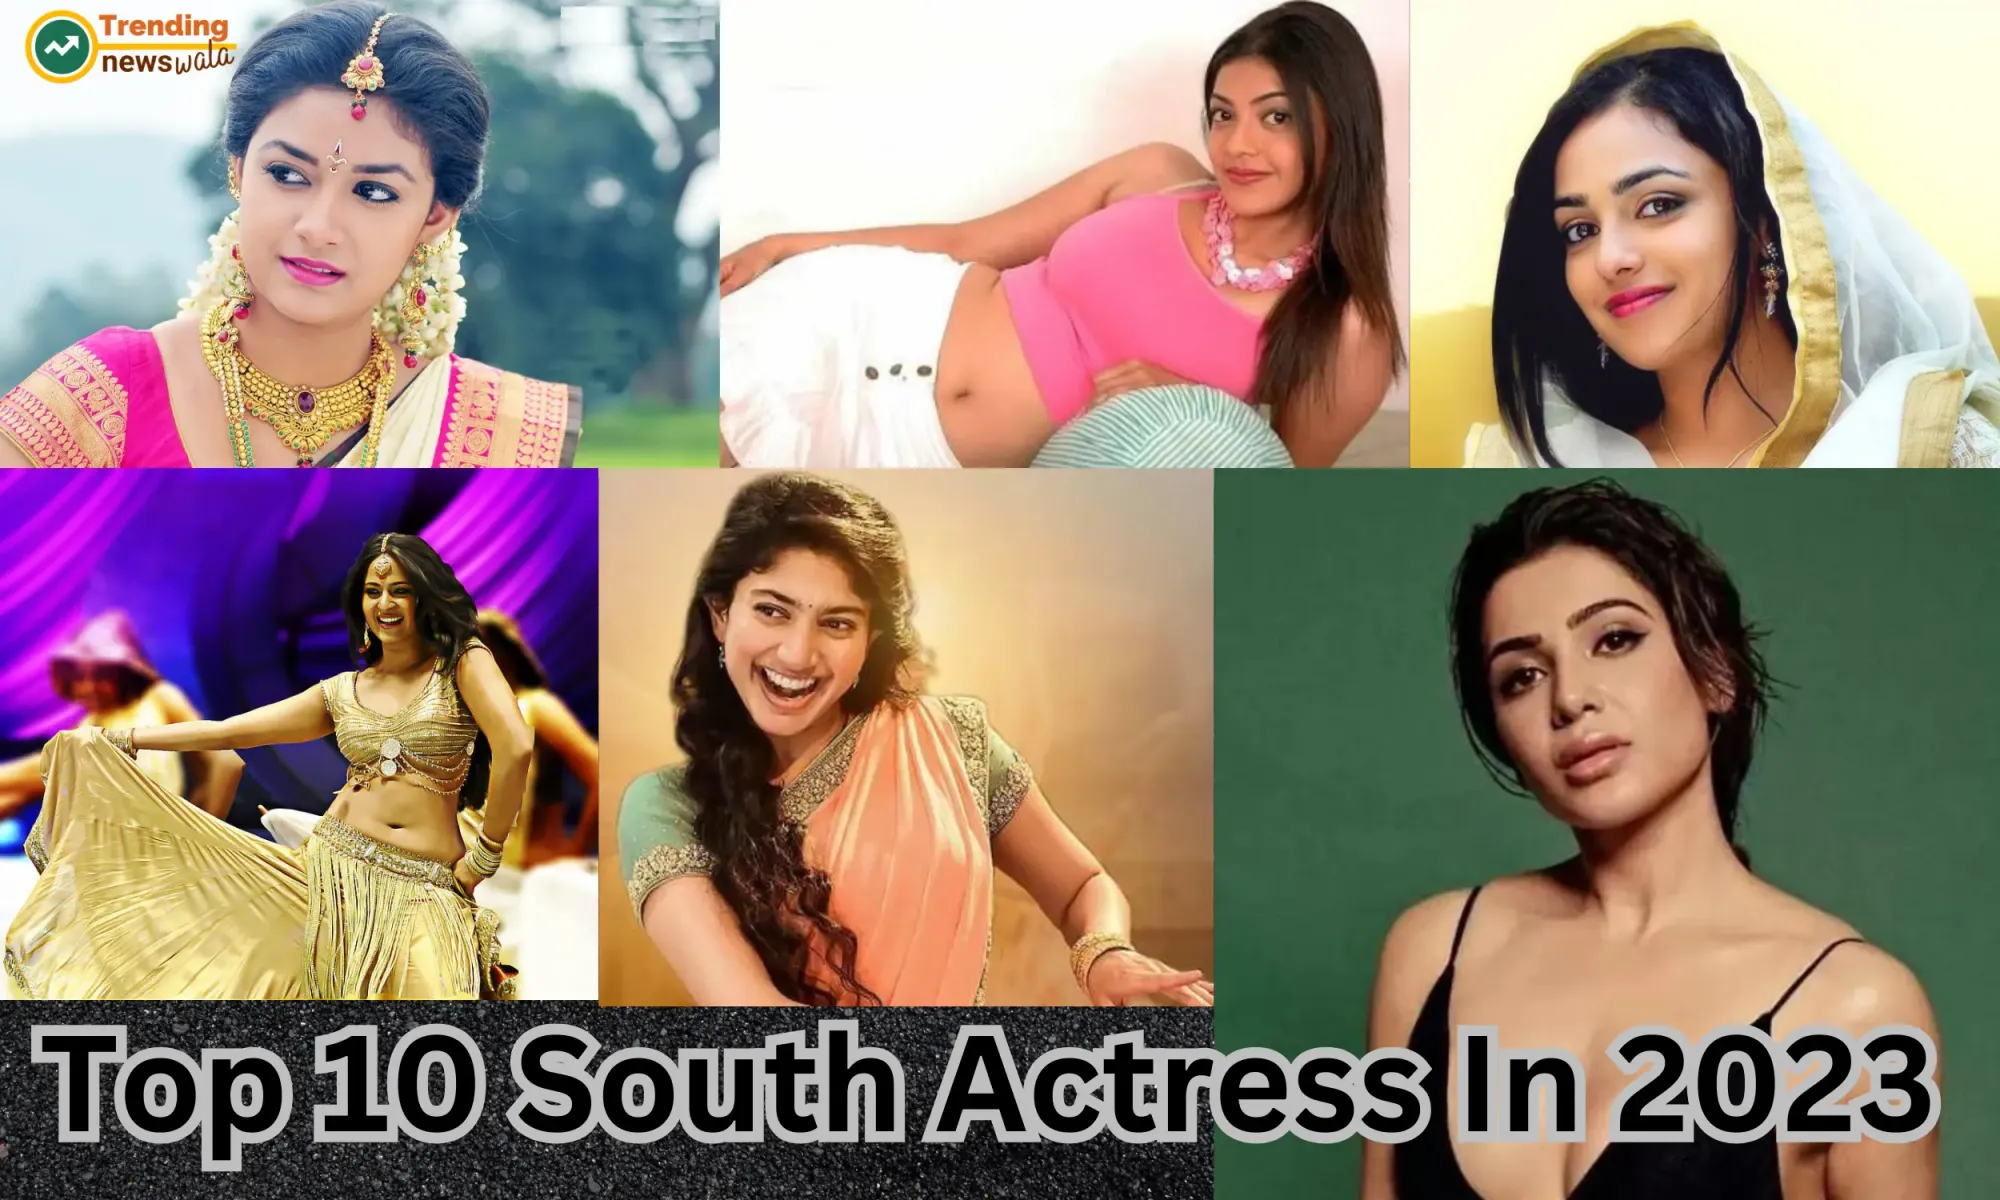 Top 10 South Actress In 2023